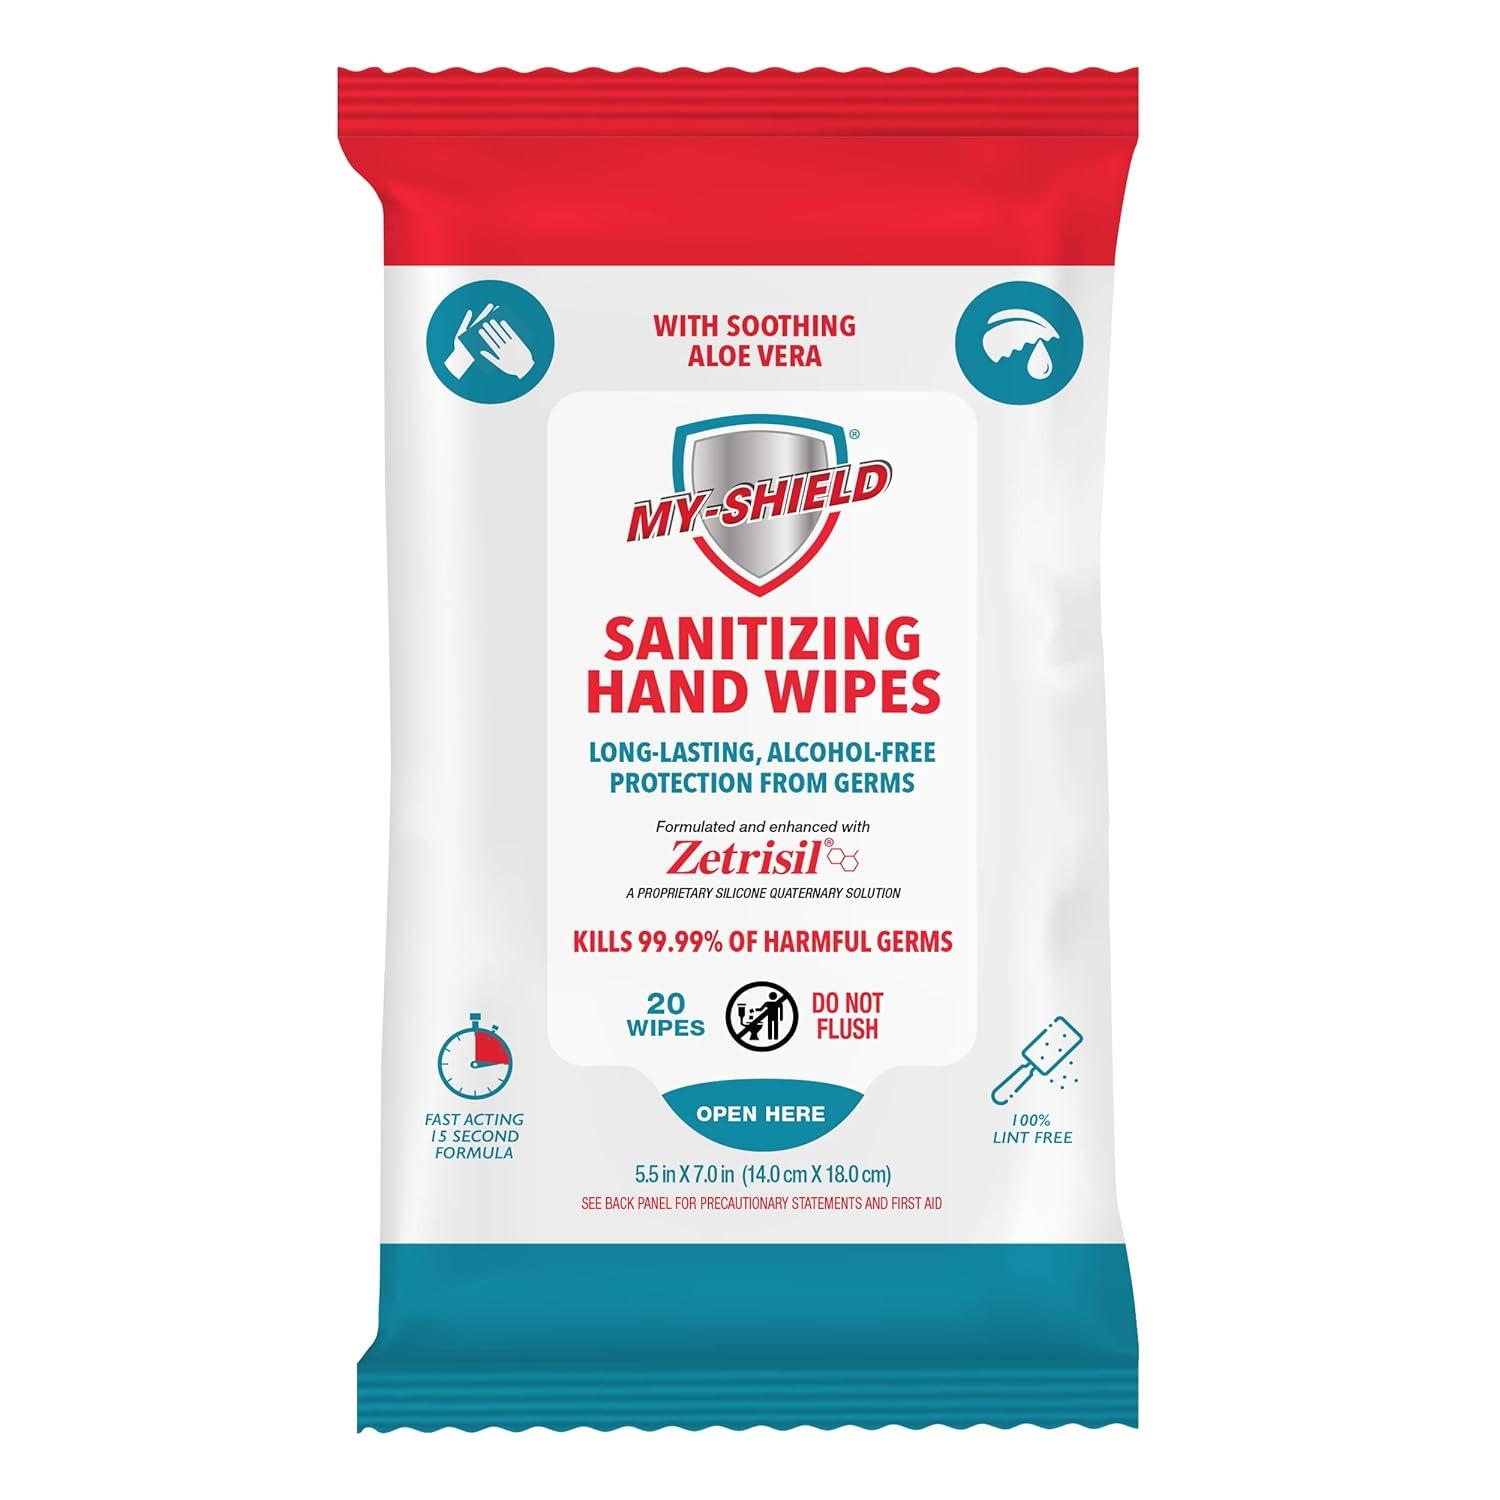 My-Shield Sanitizing Hand Wipes - Travel Pack - 20 Count (4-pack)  Alcohol-Free Long-lasting Protection. Kills 99.9% of Germs. Moisturizes  With Aloe Vera. Formulated with Zetrisil.